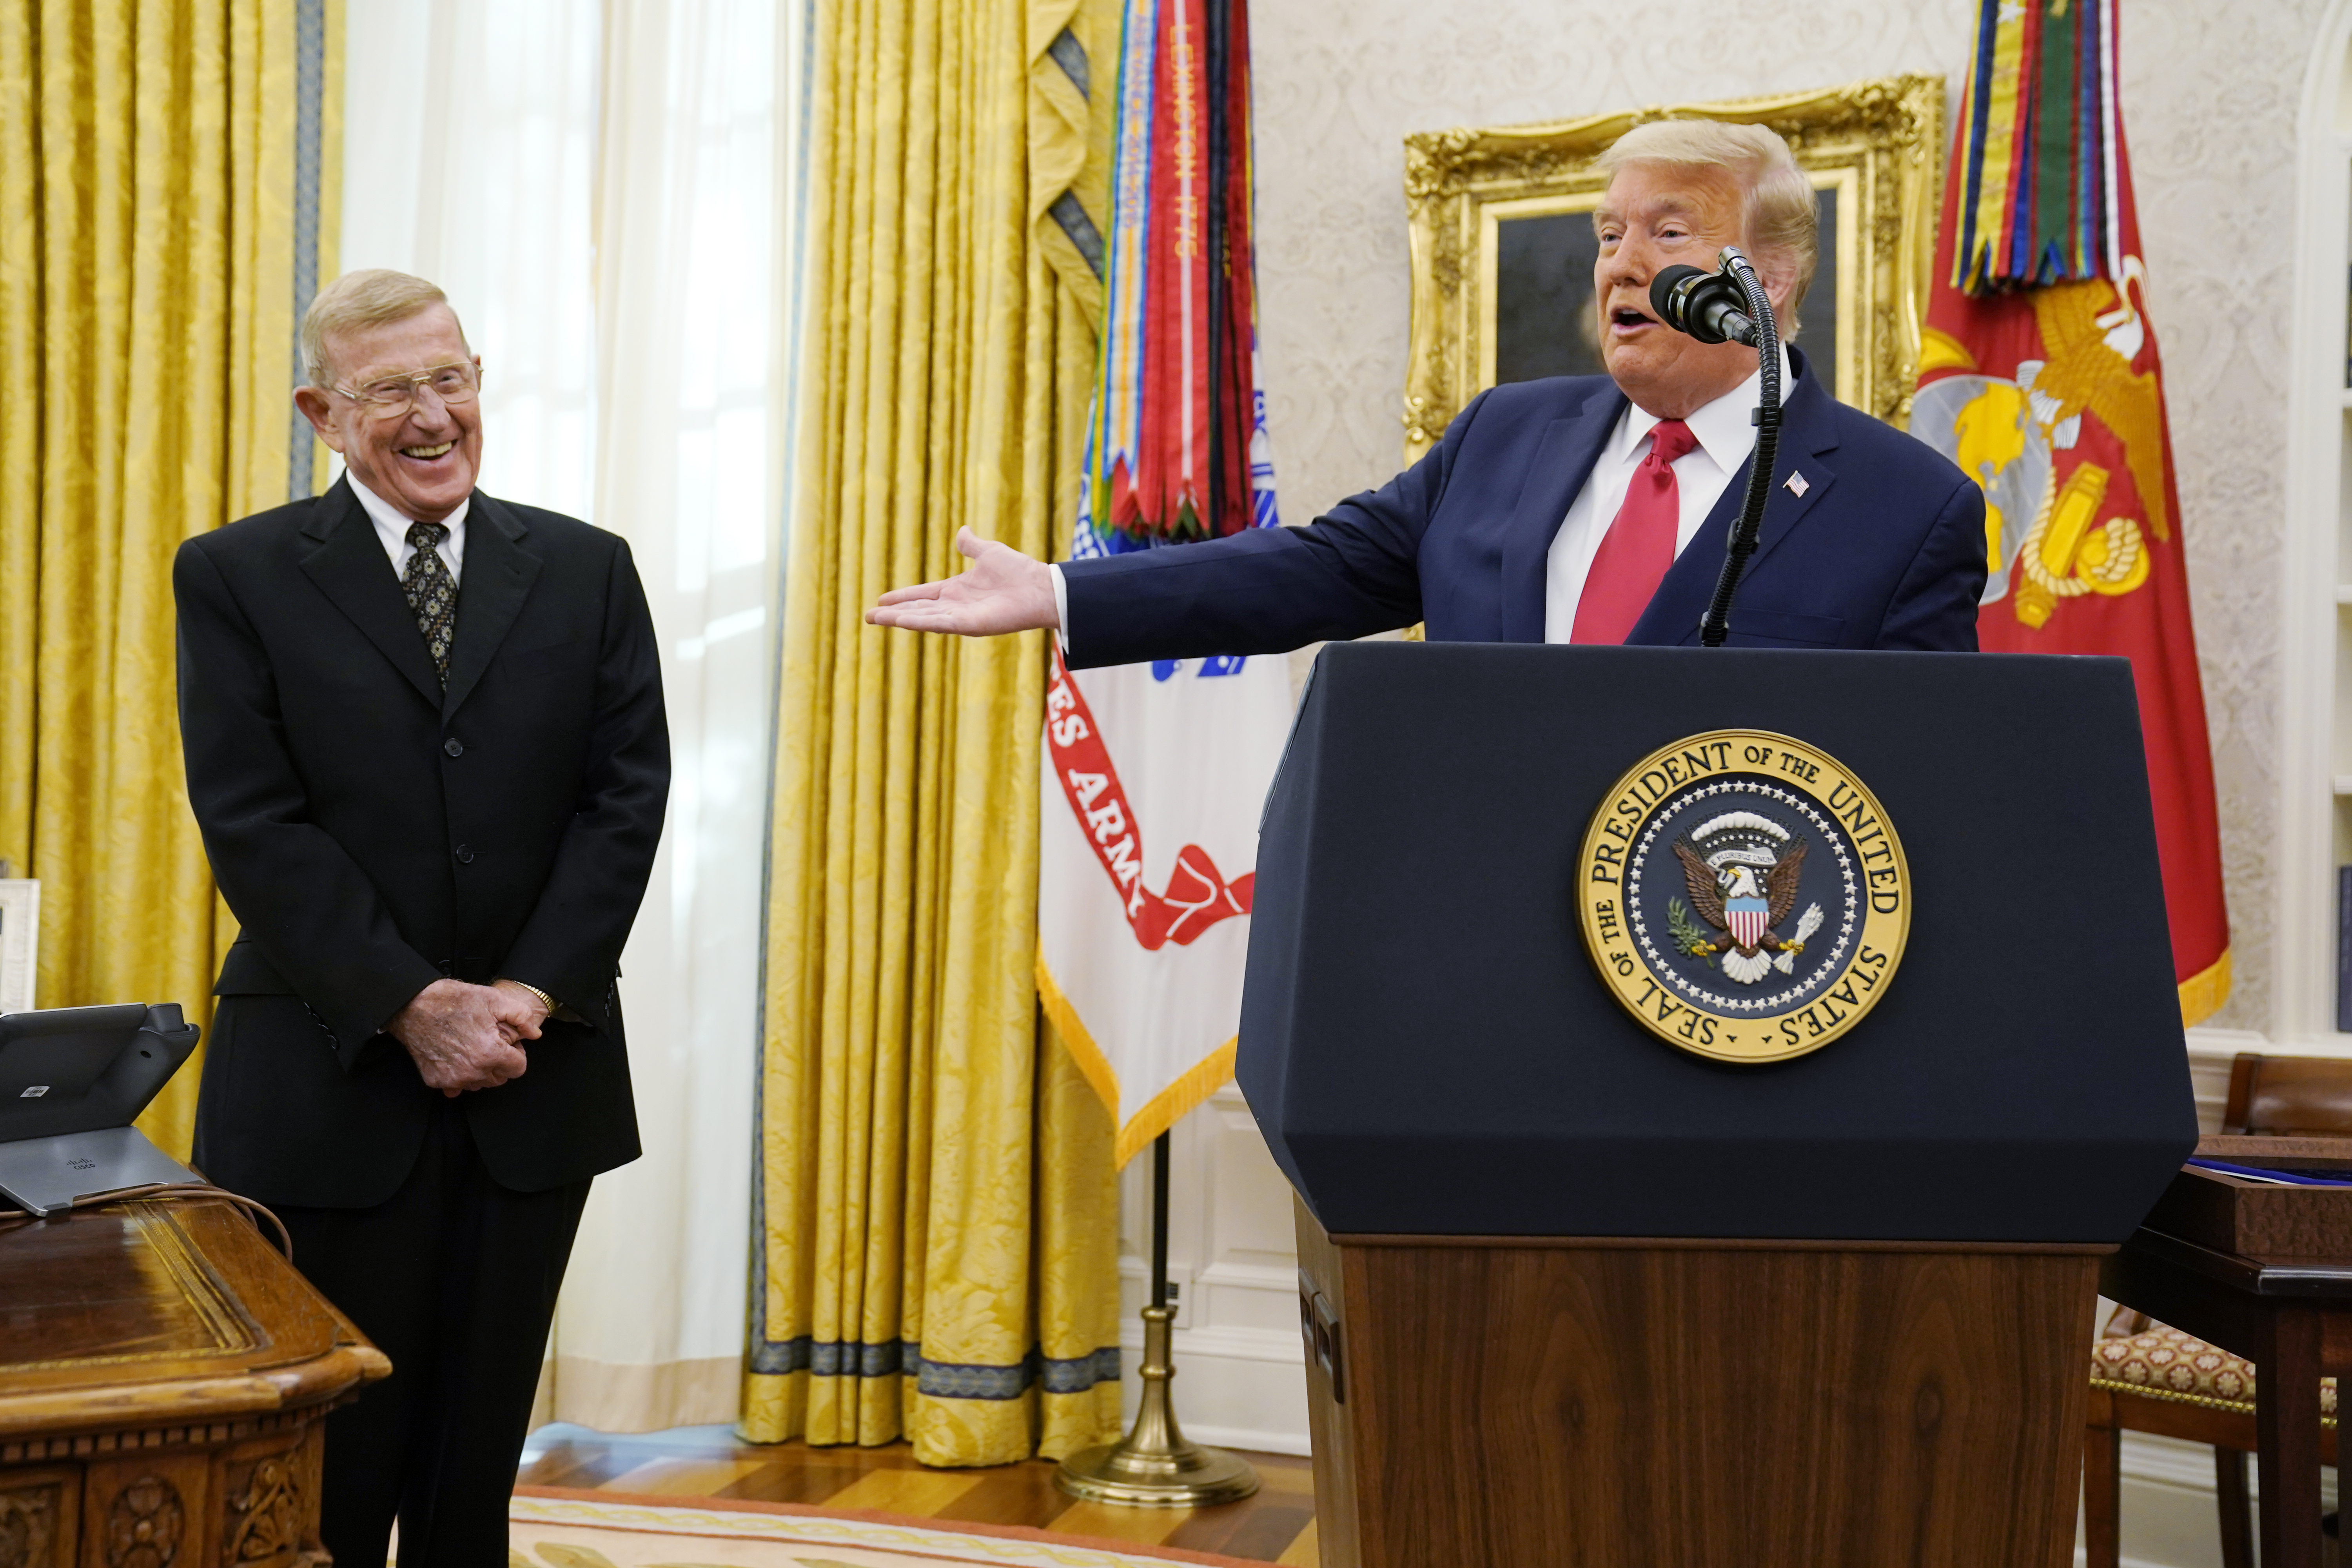 President Donald Trump speaks before awarding the medal of Freedom, the highest civilian honor, to former college football coach Lou Holtz in the Oval Office at the White House, Thursday, Dec. 3, 2020, in Washington. Holtz had a storied 34-year coaching career that included winning the 1988 national title at the University of Notre Dame. (AP Photo/Evan Vucci)